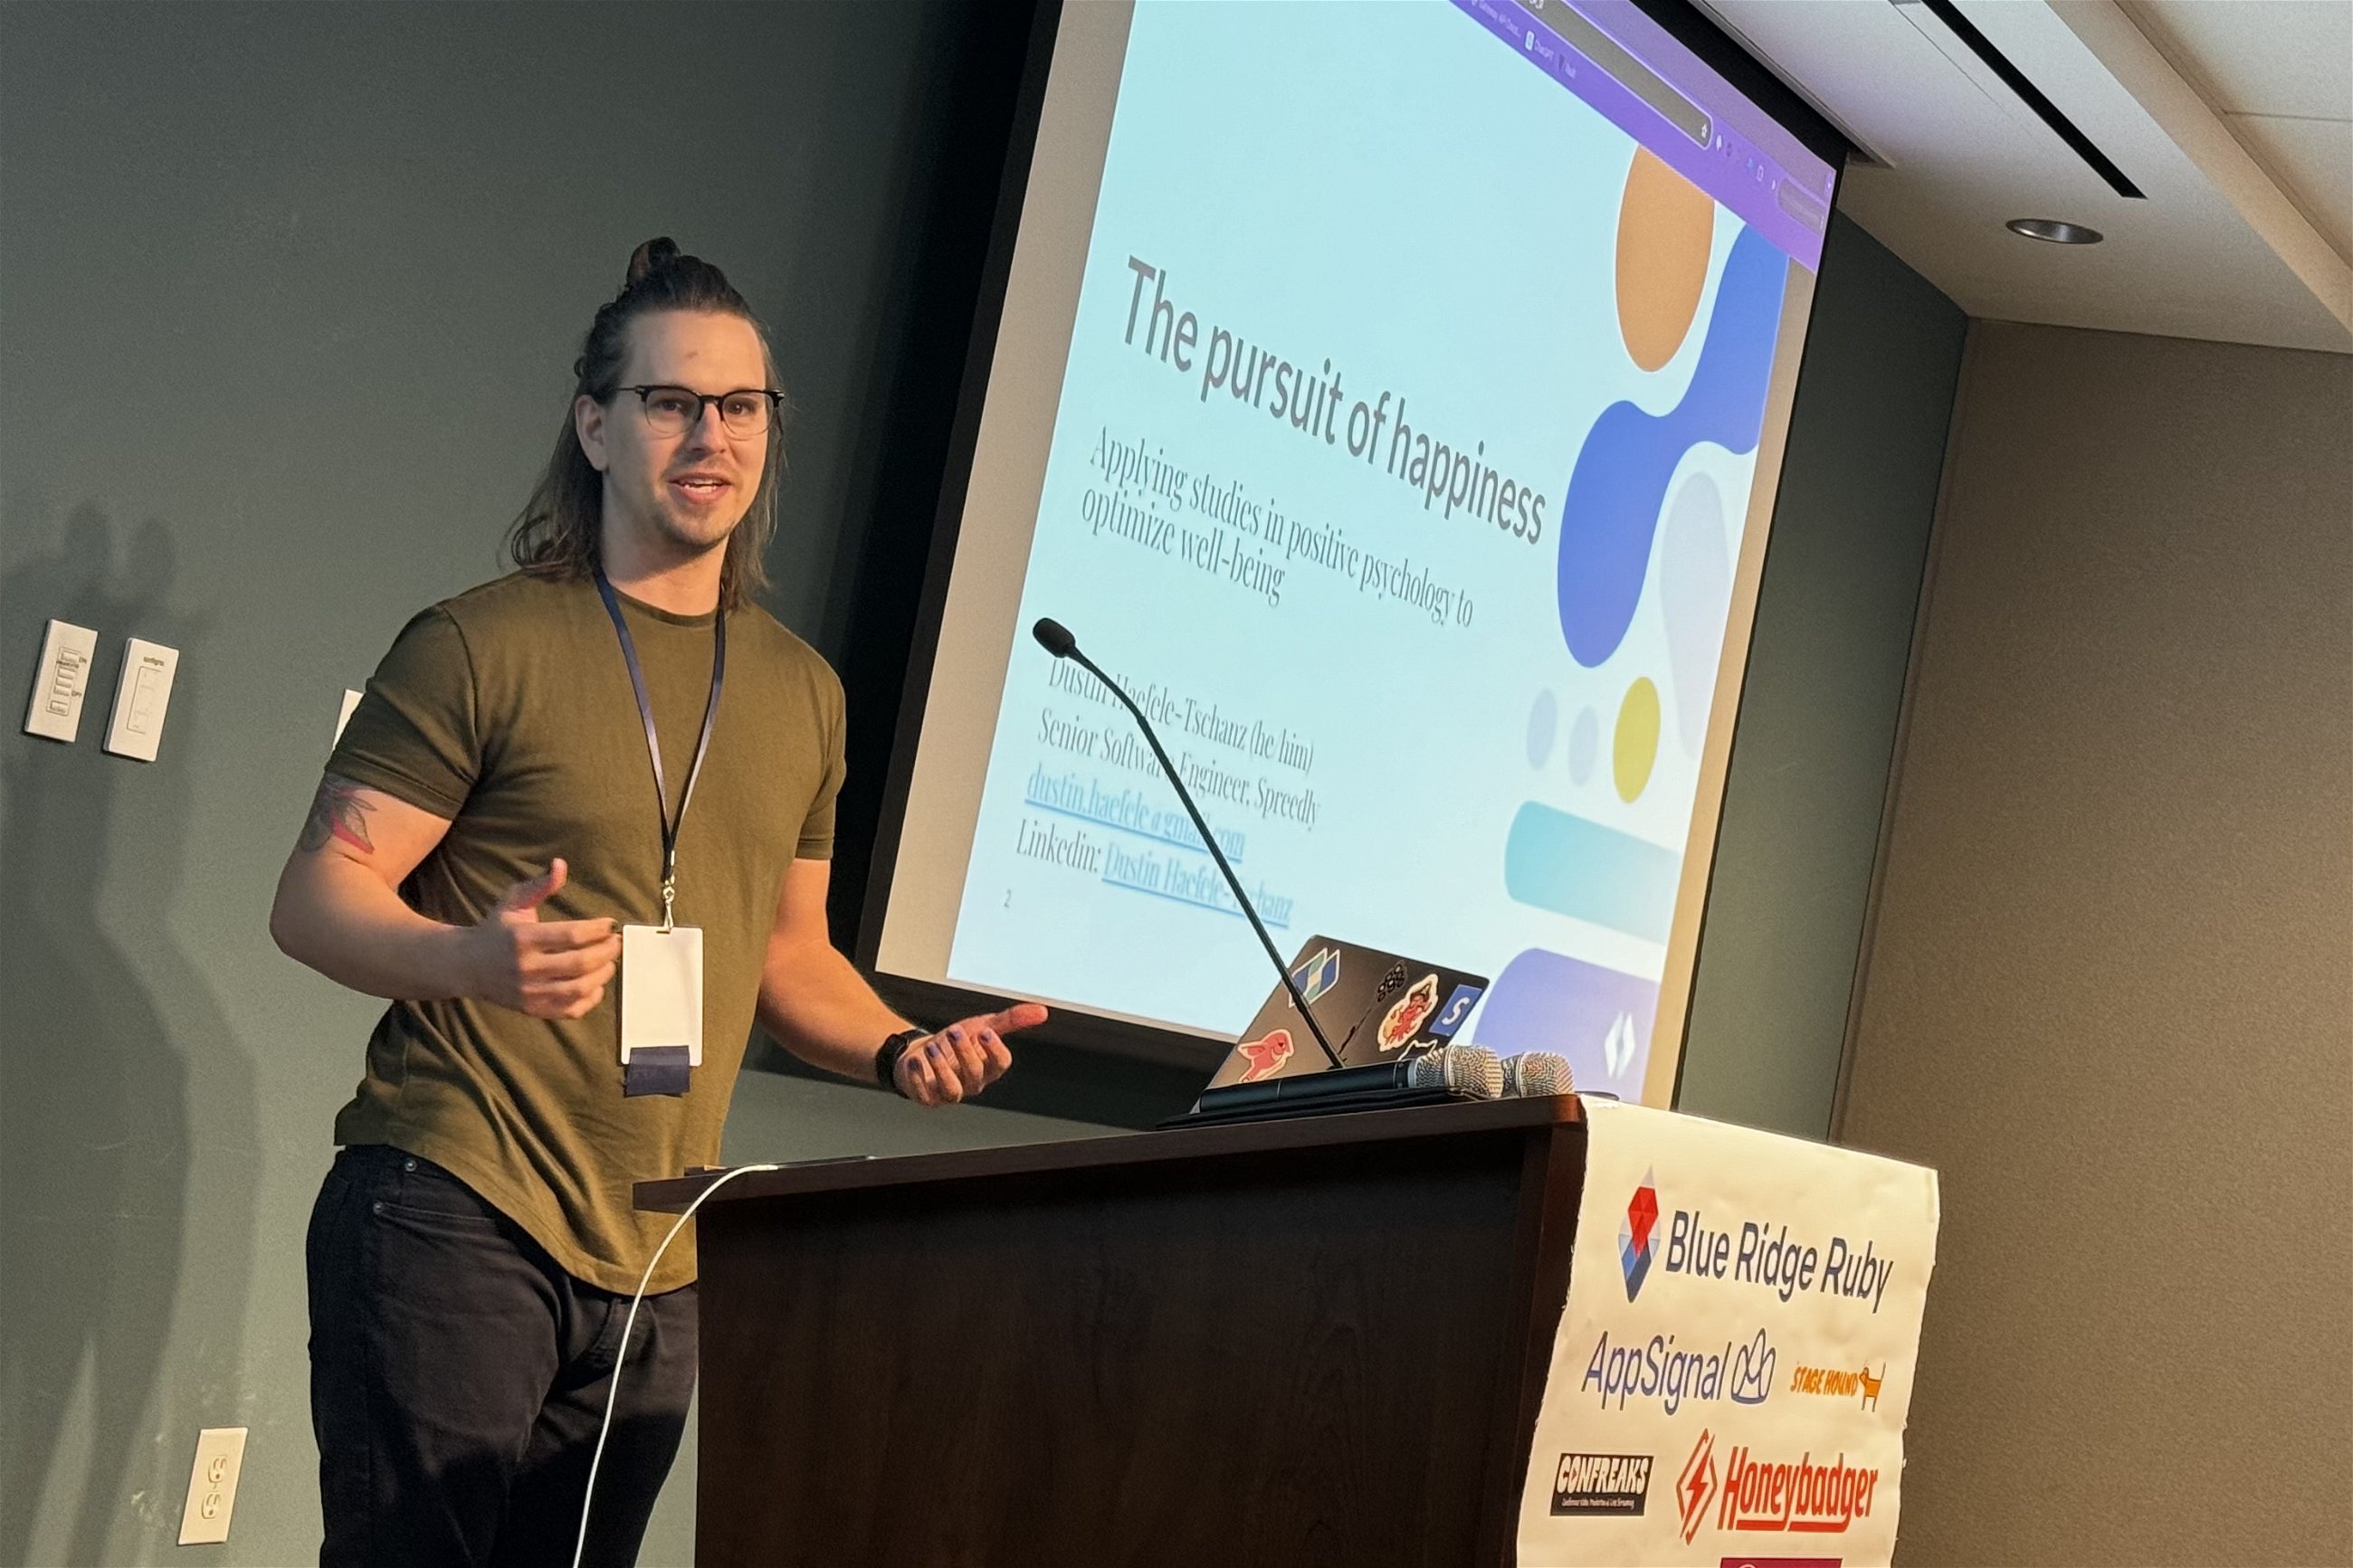 Dustin Haefele-Tschanz presents "The Pursuit of Happiness: Applying Studies in Positive Psychology to Optimize Well-being" at Blue Ridge Ruby conference, engaging the audience with a slide displayed behind him, featuring his contact information and professional title.